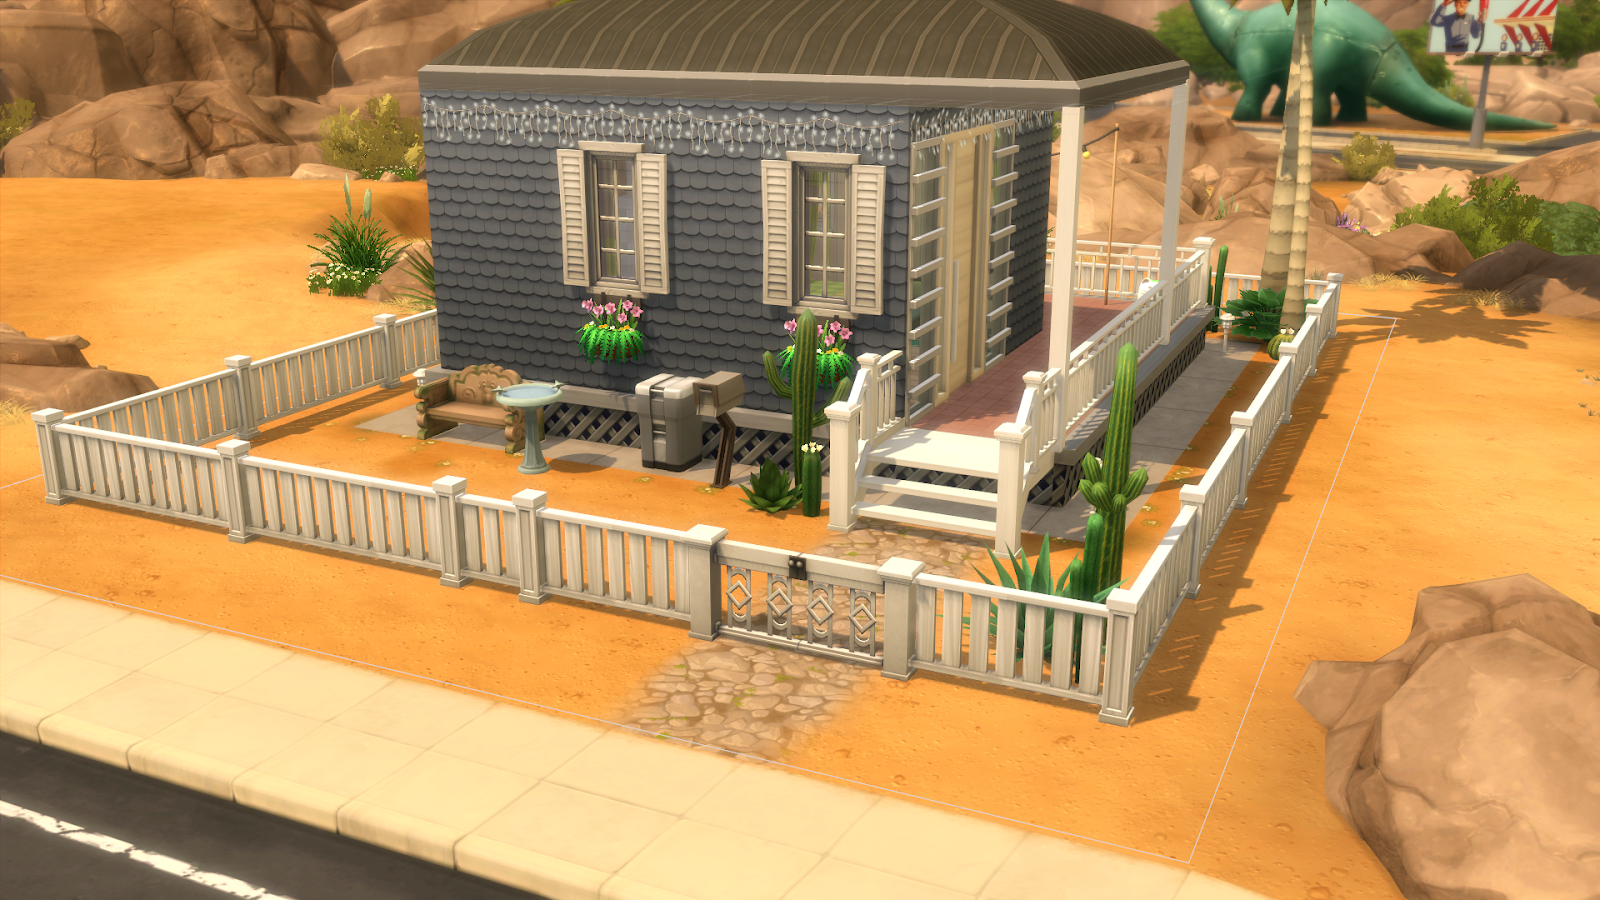 sims 4 trailer house download